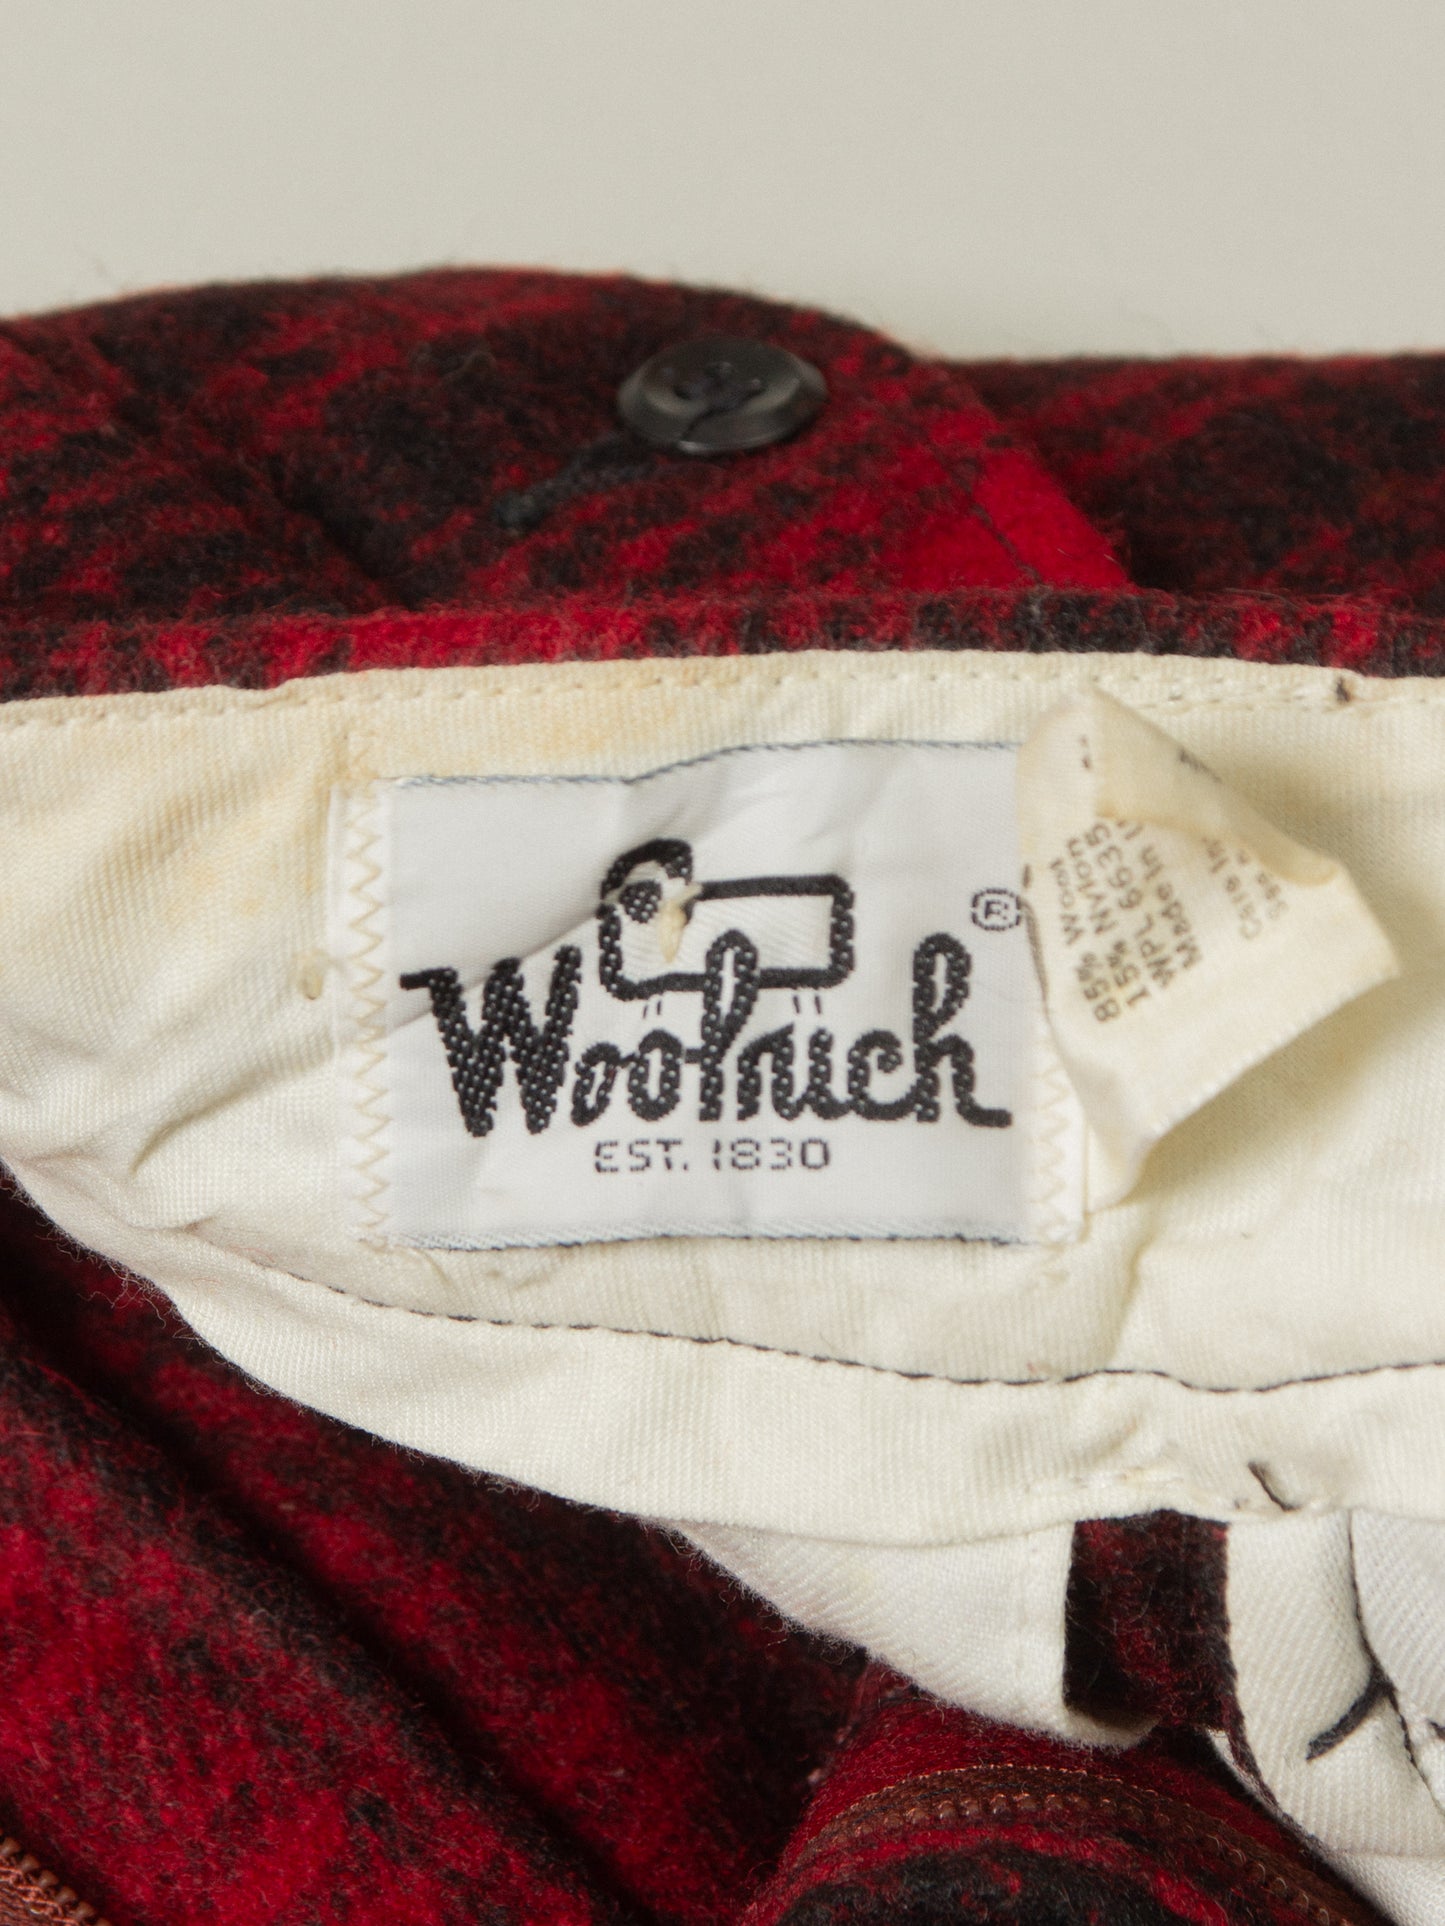 Vtg 1960s Woolrich Buffalo Plaid Wool Trousers - Made in USA (34x33)